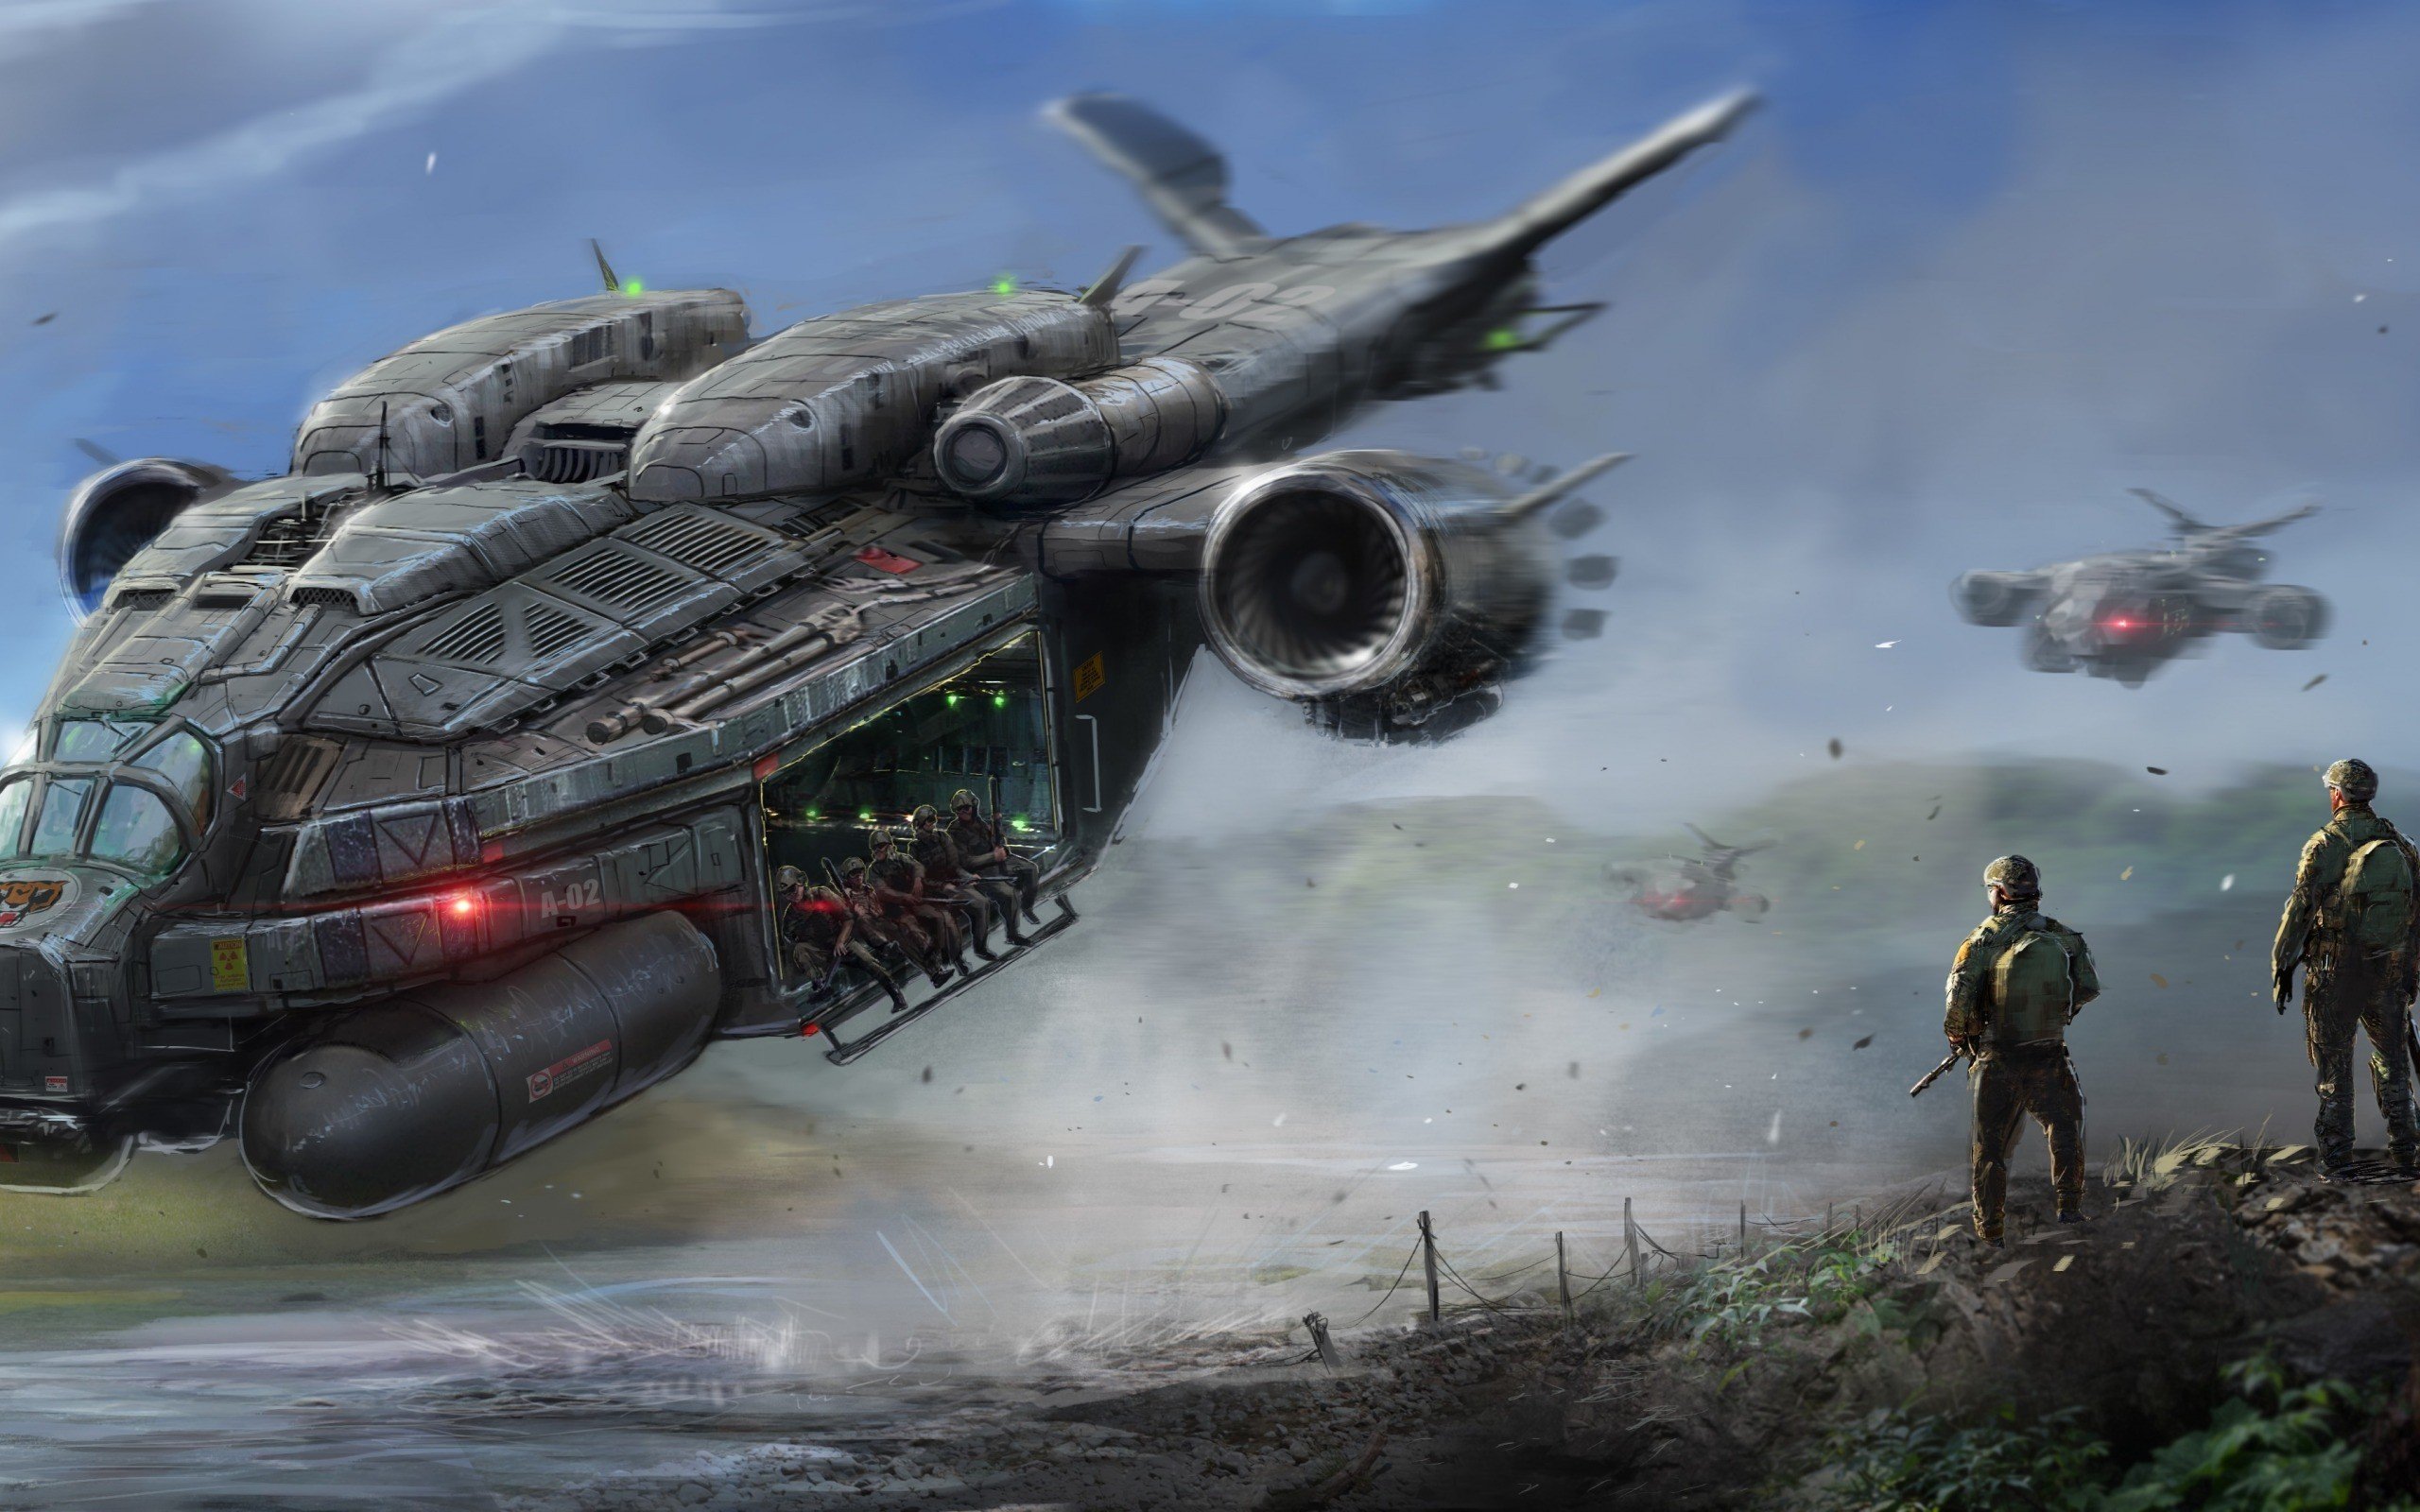 Wallpaper, digital art, futuristic, aircraft, tank, science fiction, military, air force, aviation, helicopter, screenshot, atmosphere of earth, combat vehicle 2560x1600